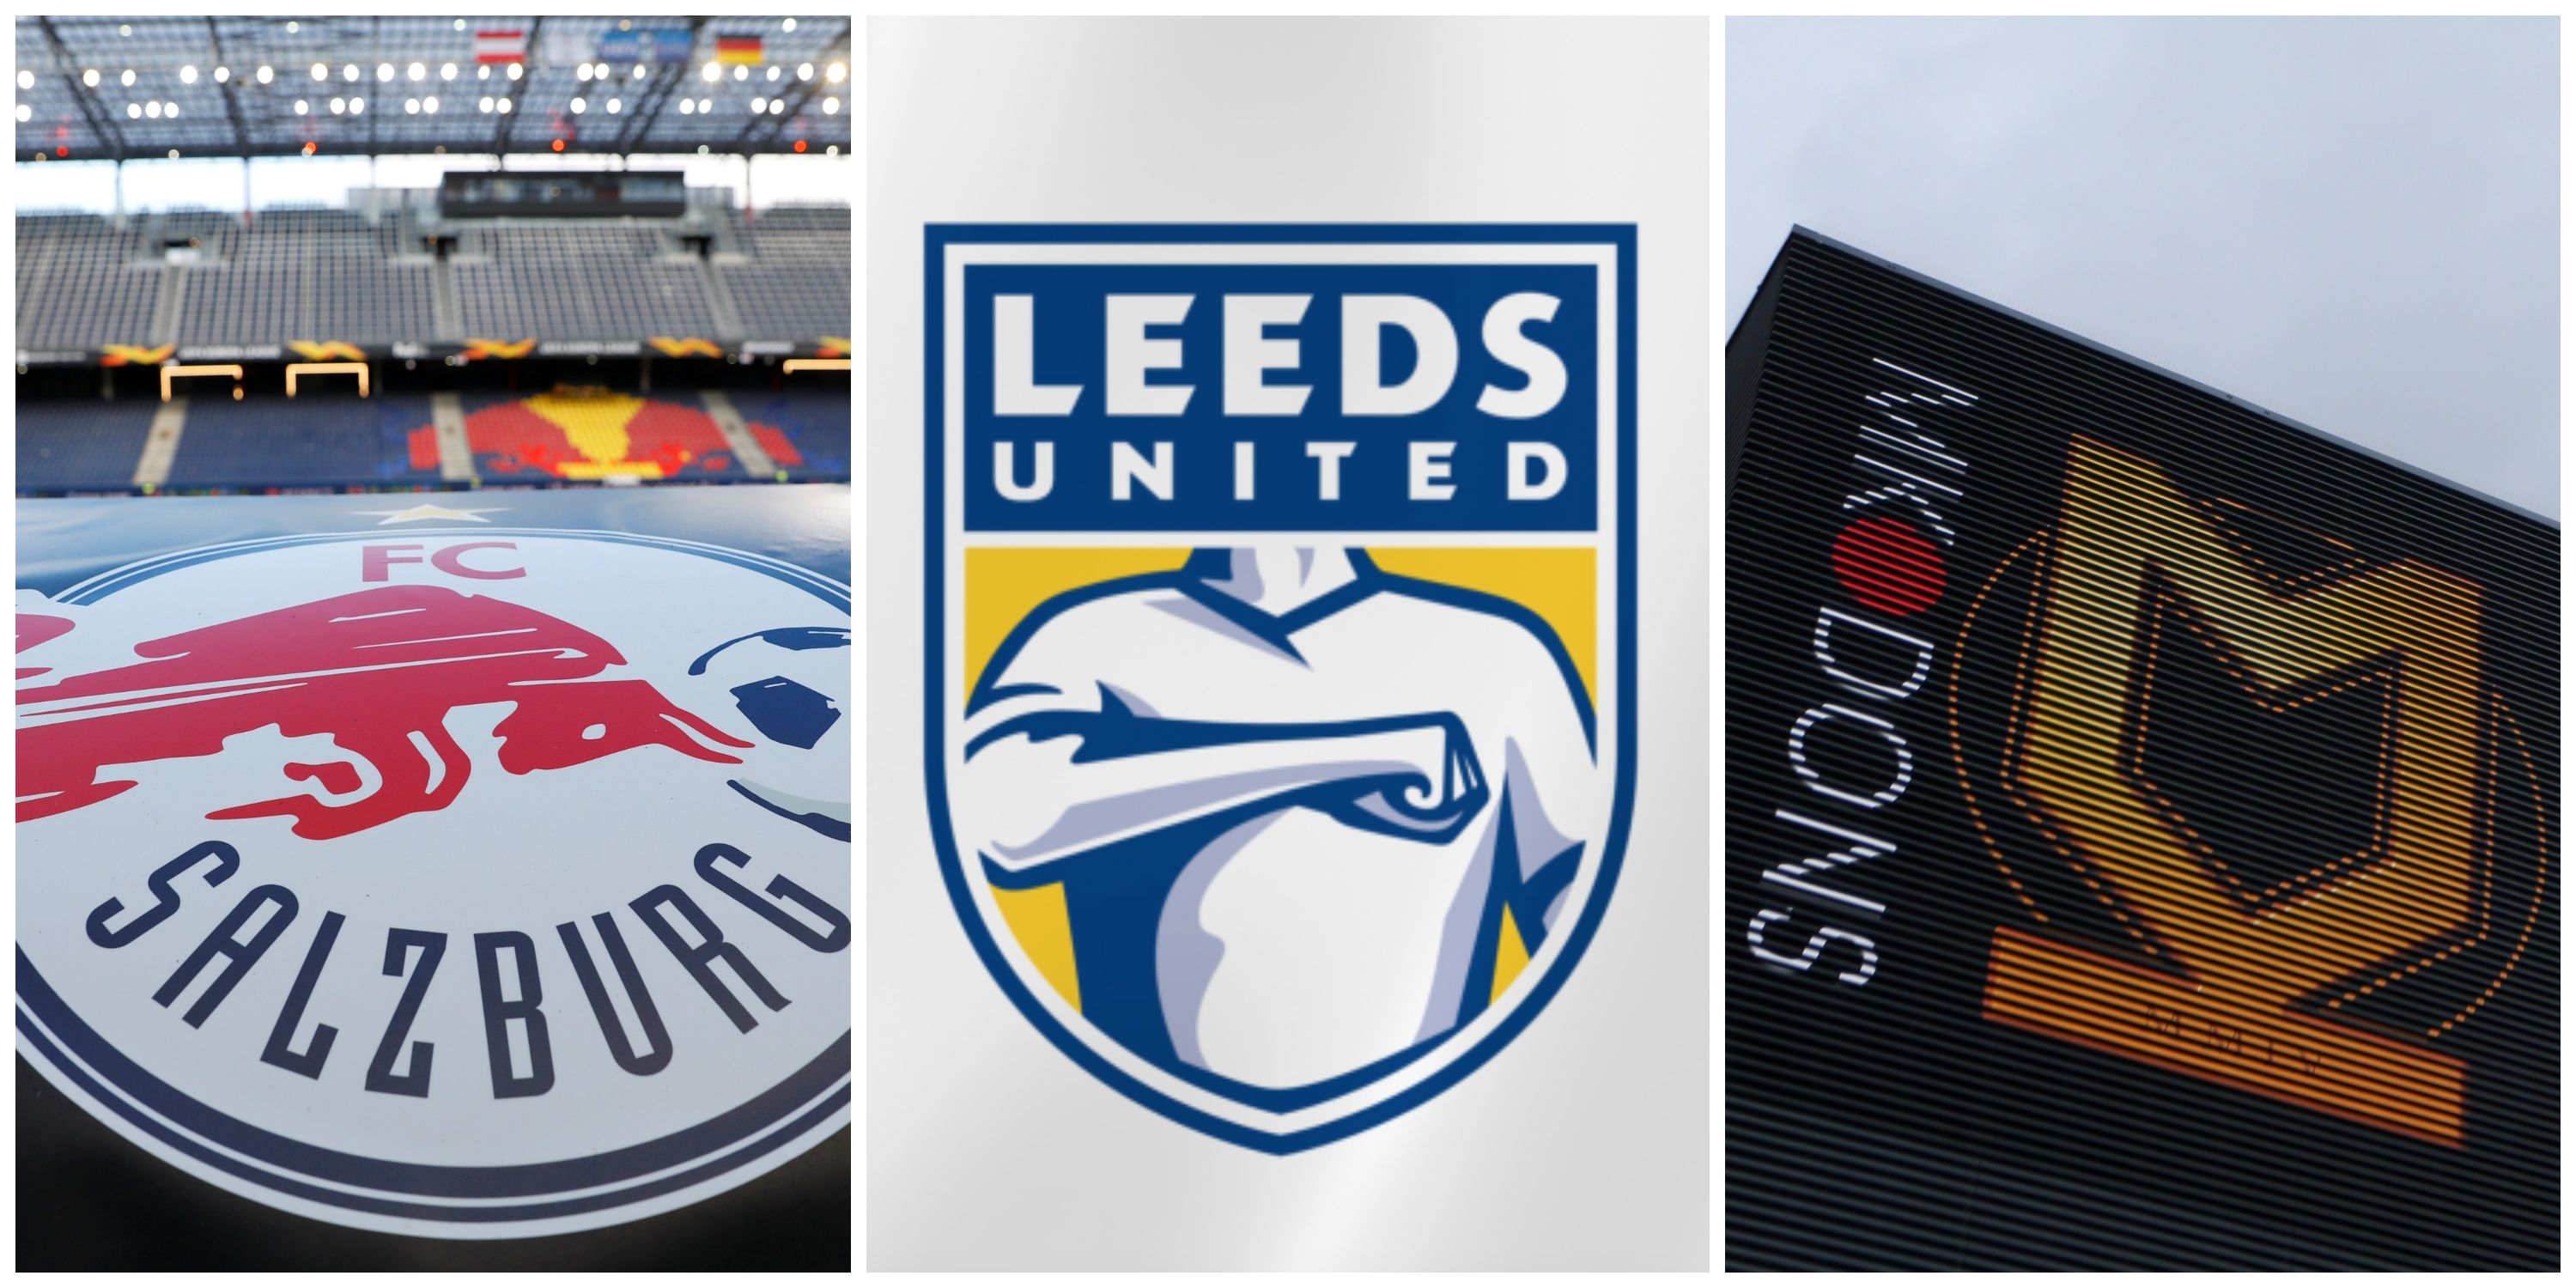 A collage of football crests.